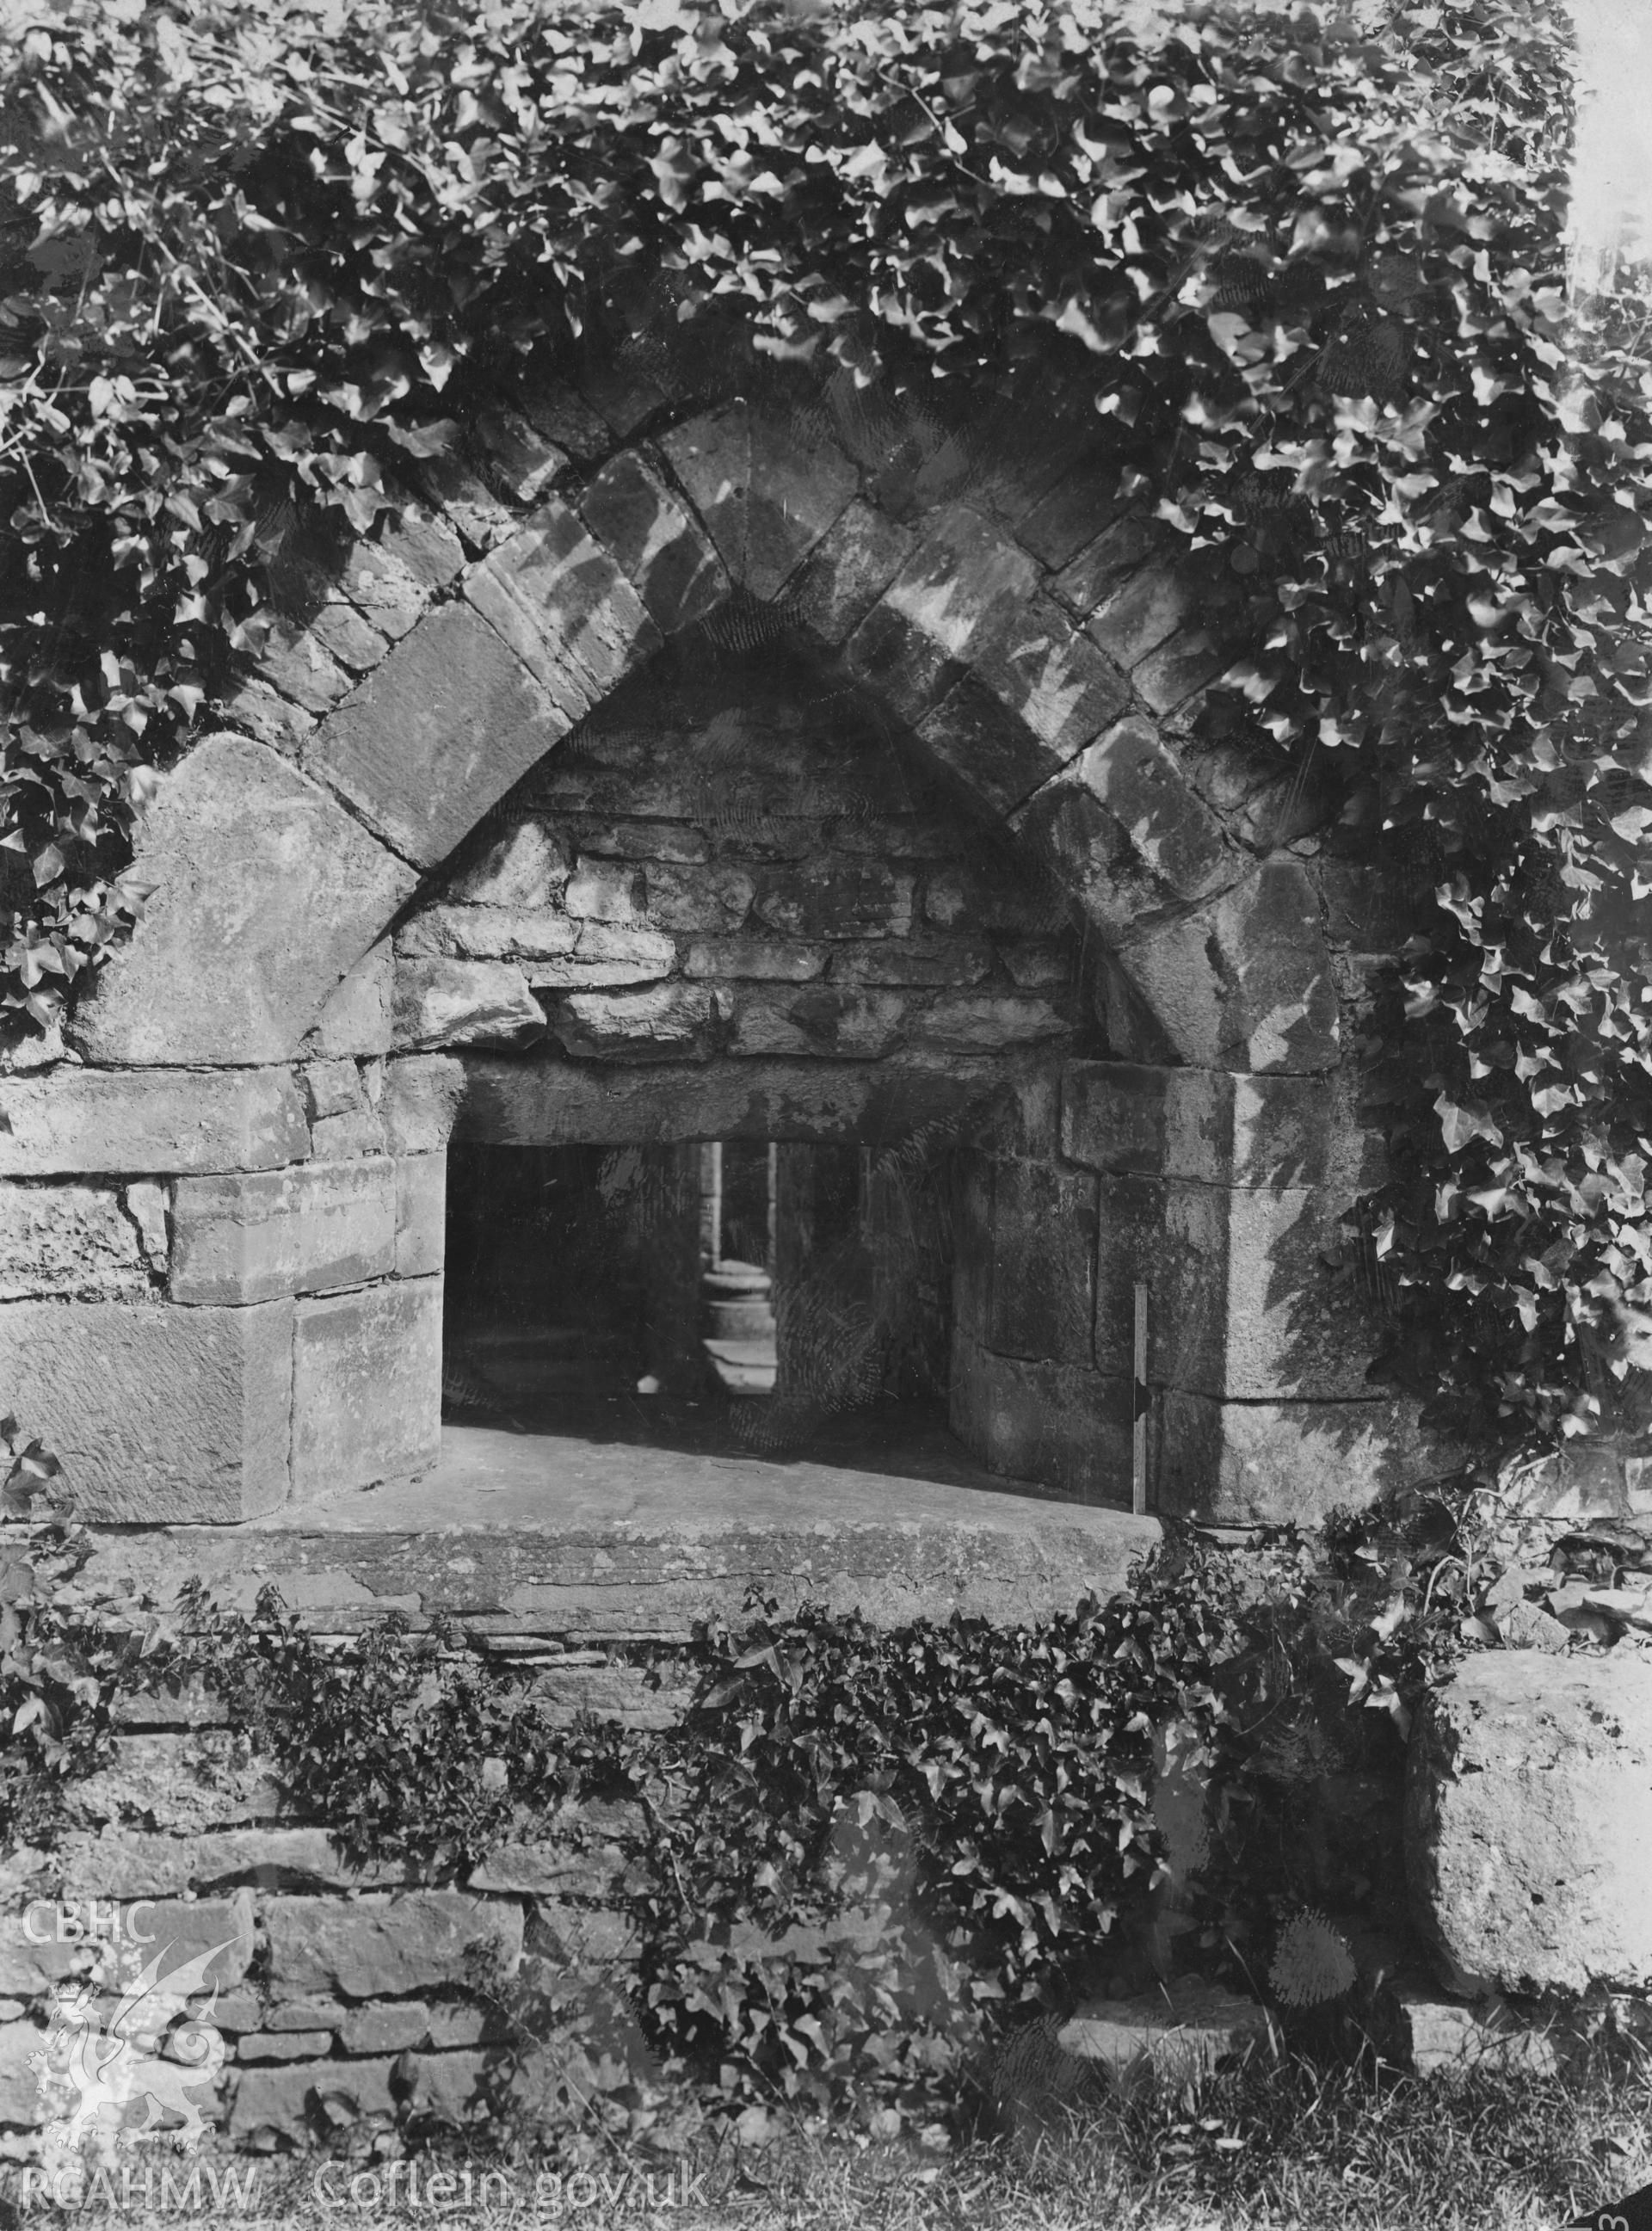 Digital copy of an early National Buildings Record photograph showing the serving hatch from the kitchen at Tintern Abbey.